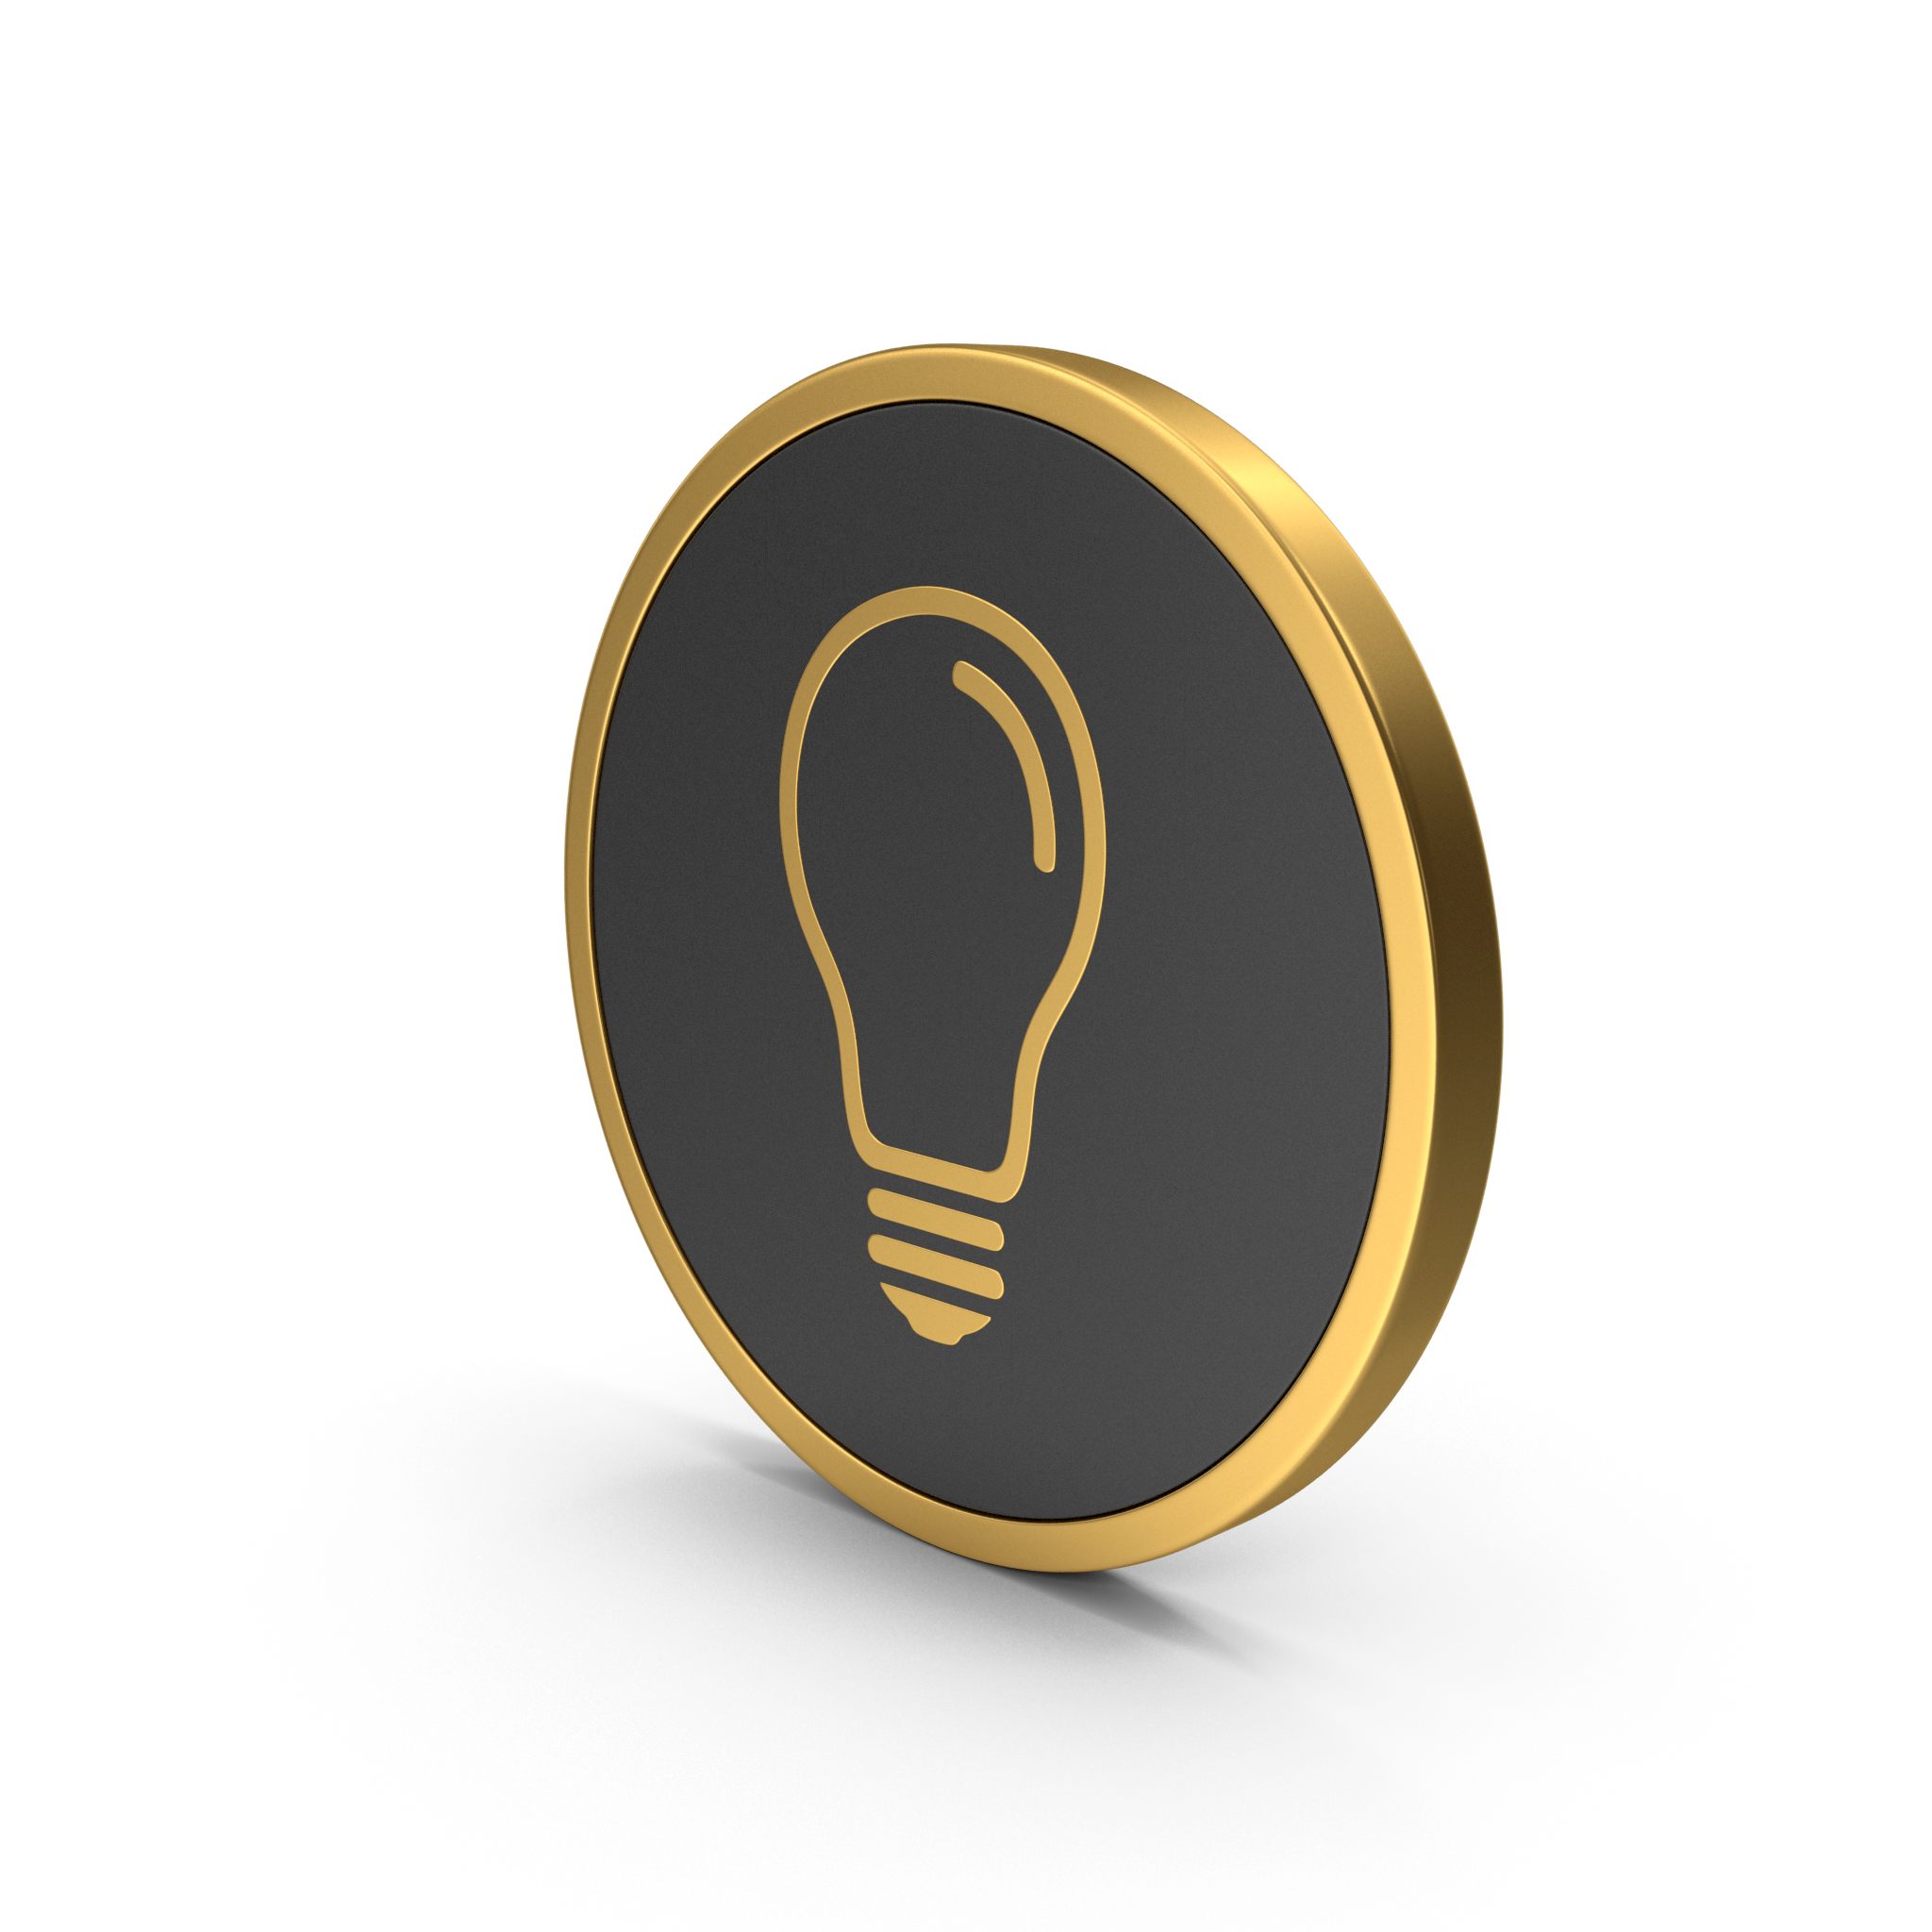 A gold and black light bulb icon on a white background, symbolizing creativity and innovation.